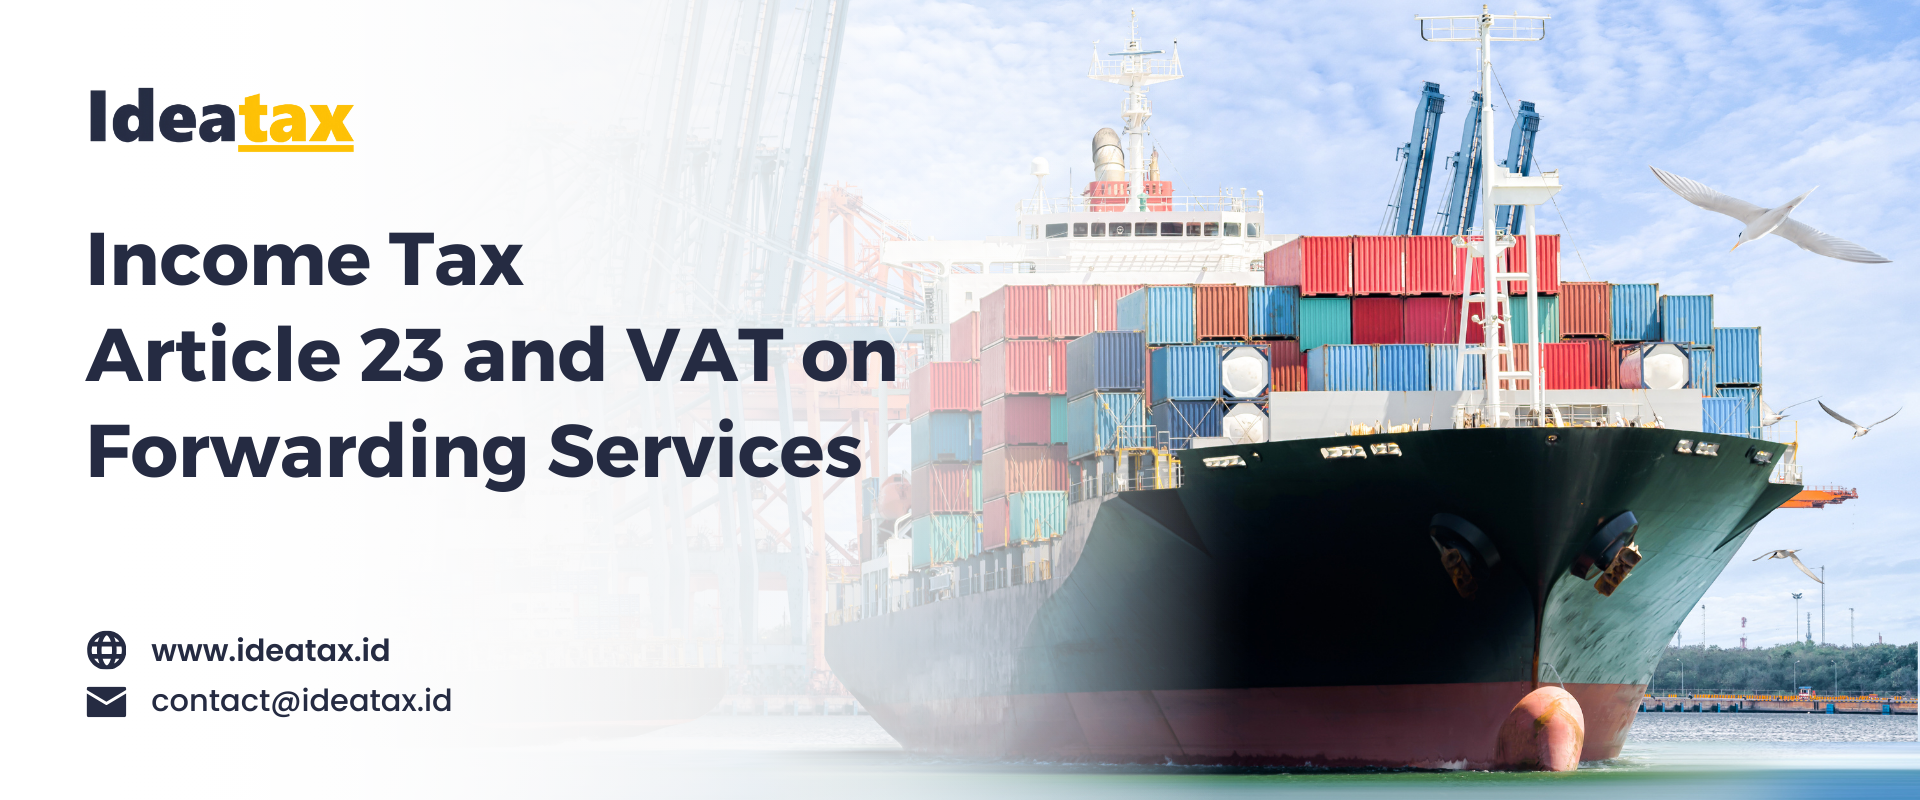 Income Tax Article 23 and VAT on Forwarding Services